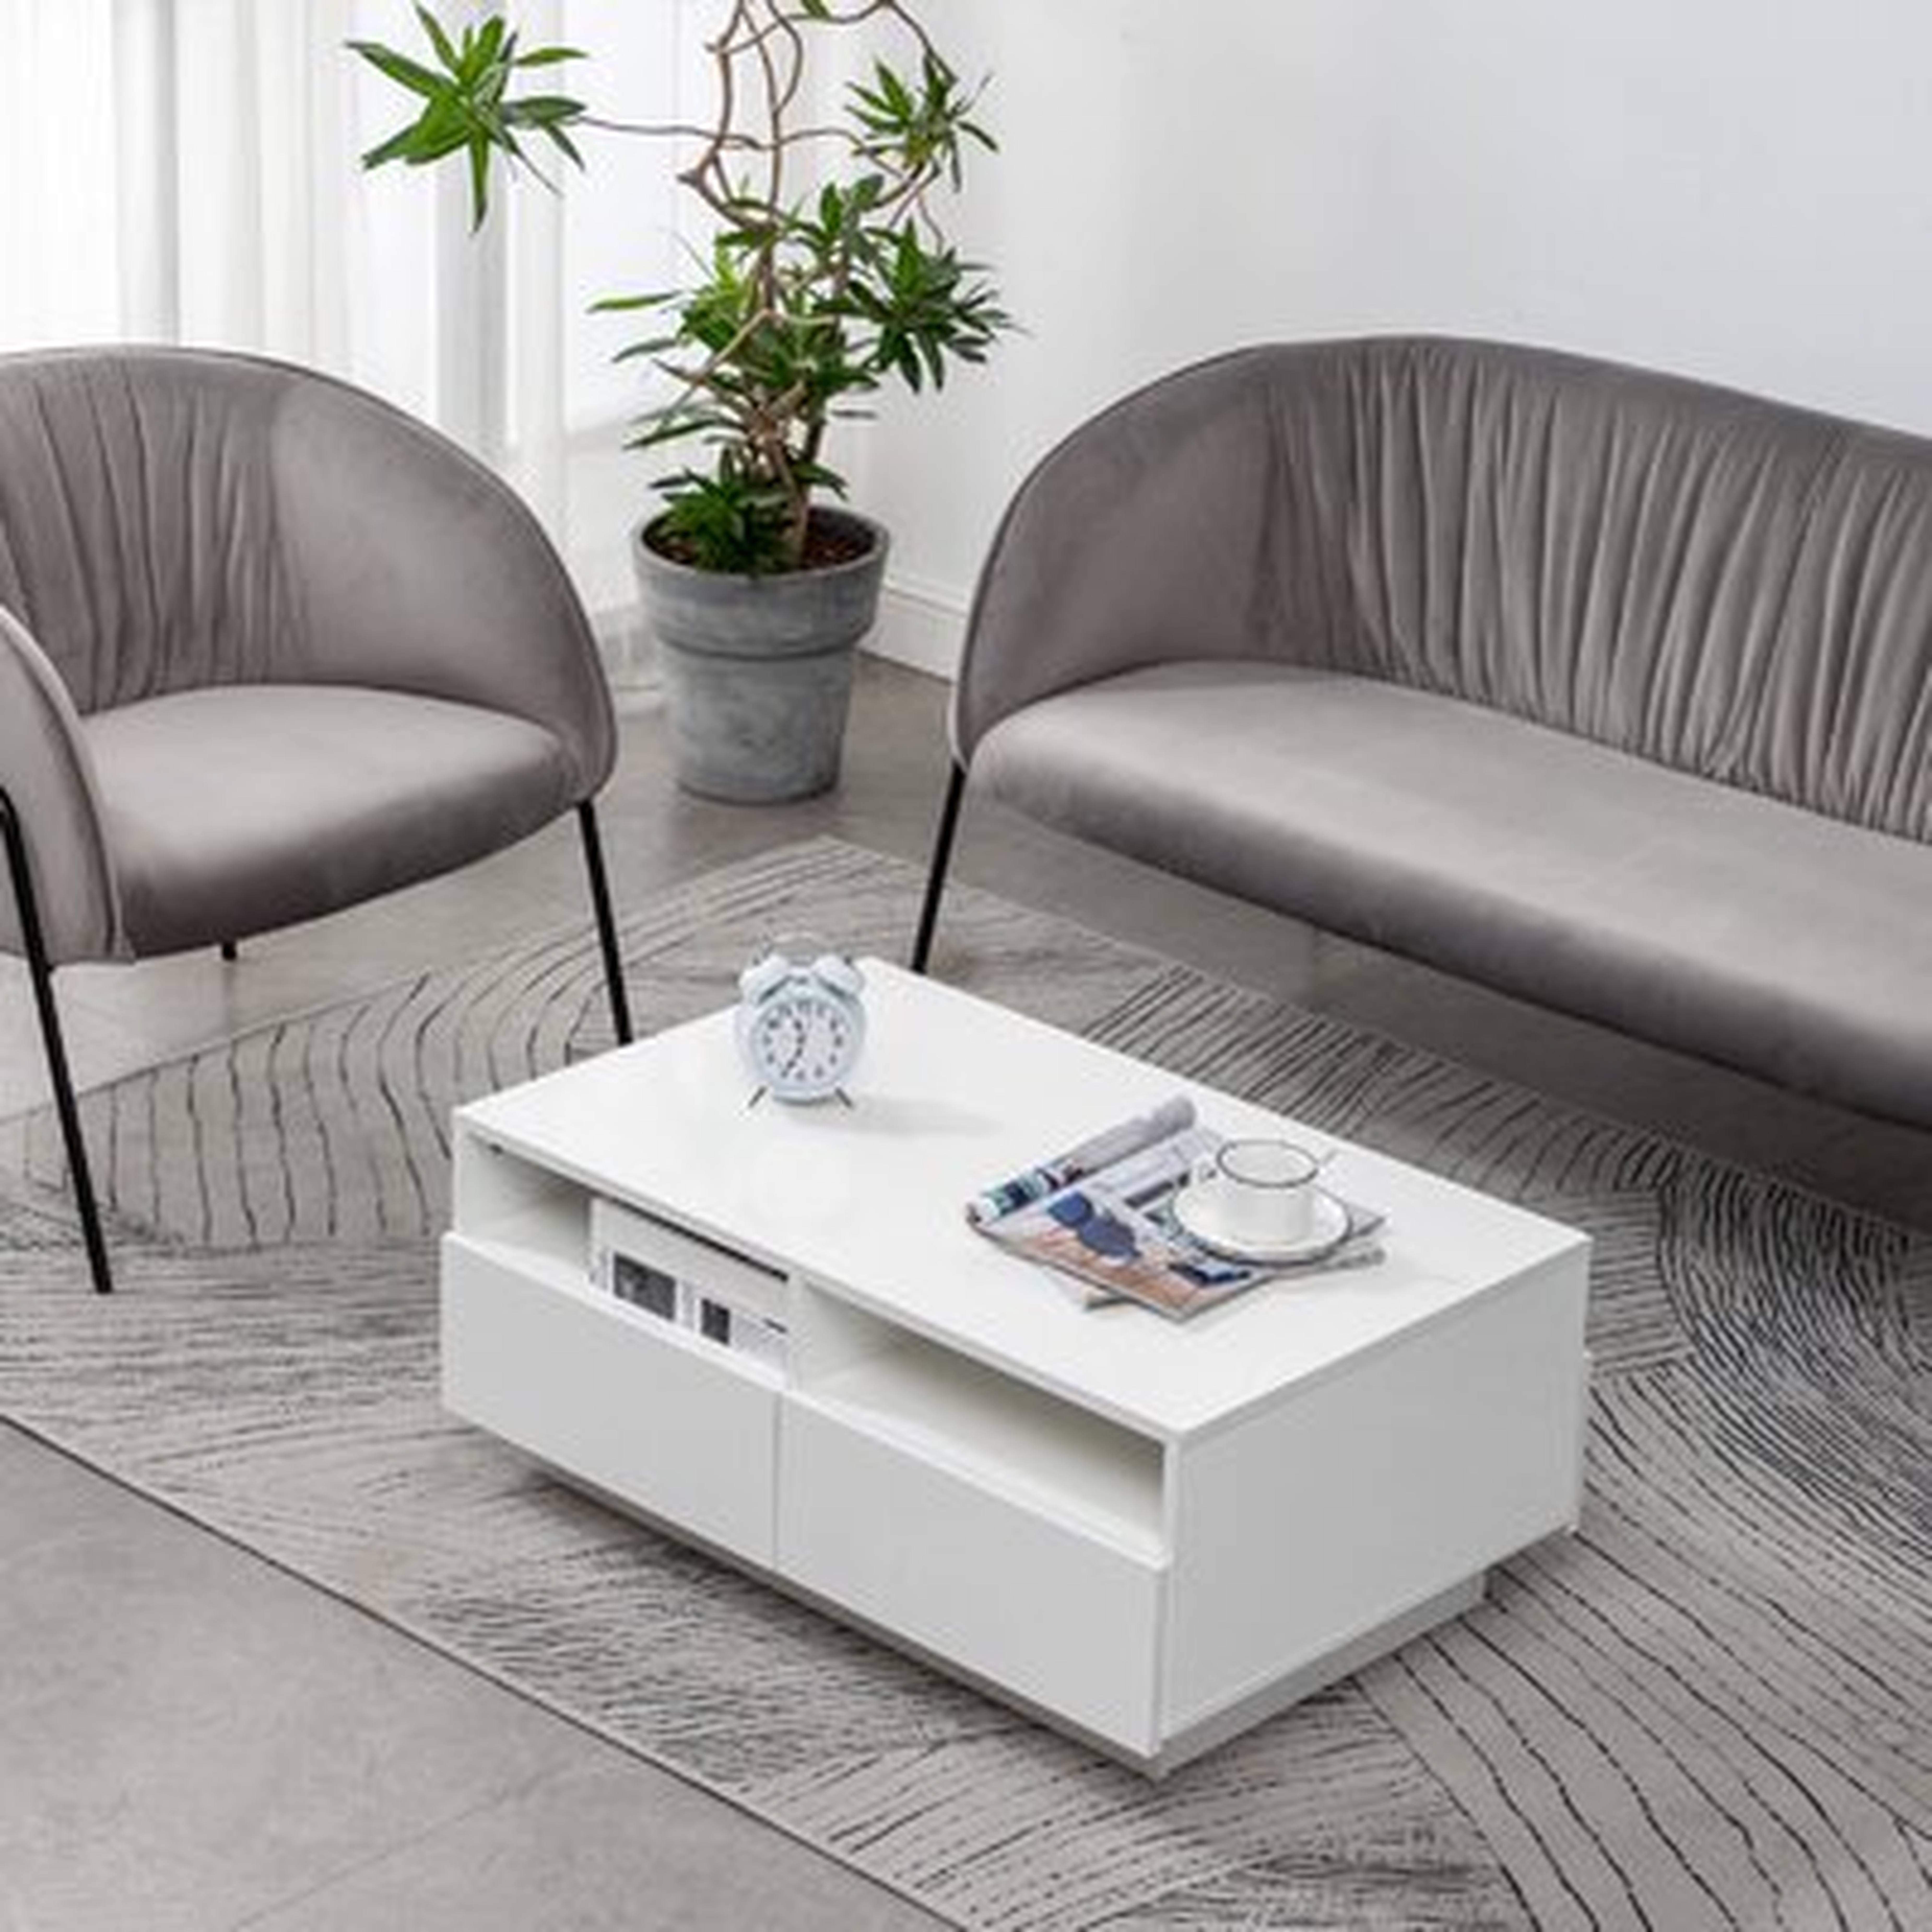 High Gloss White Rectangle Coffee Table With 2 Open Cabinets 4 Drawer For Home - Wayfair